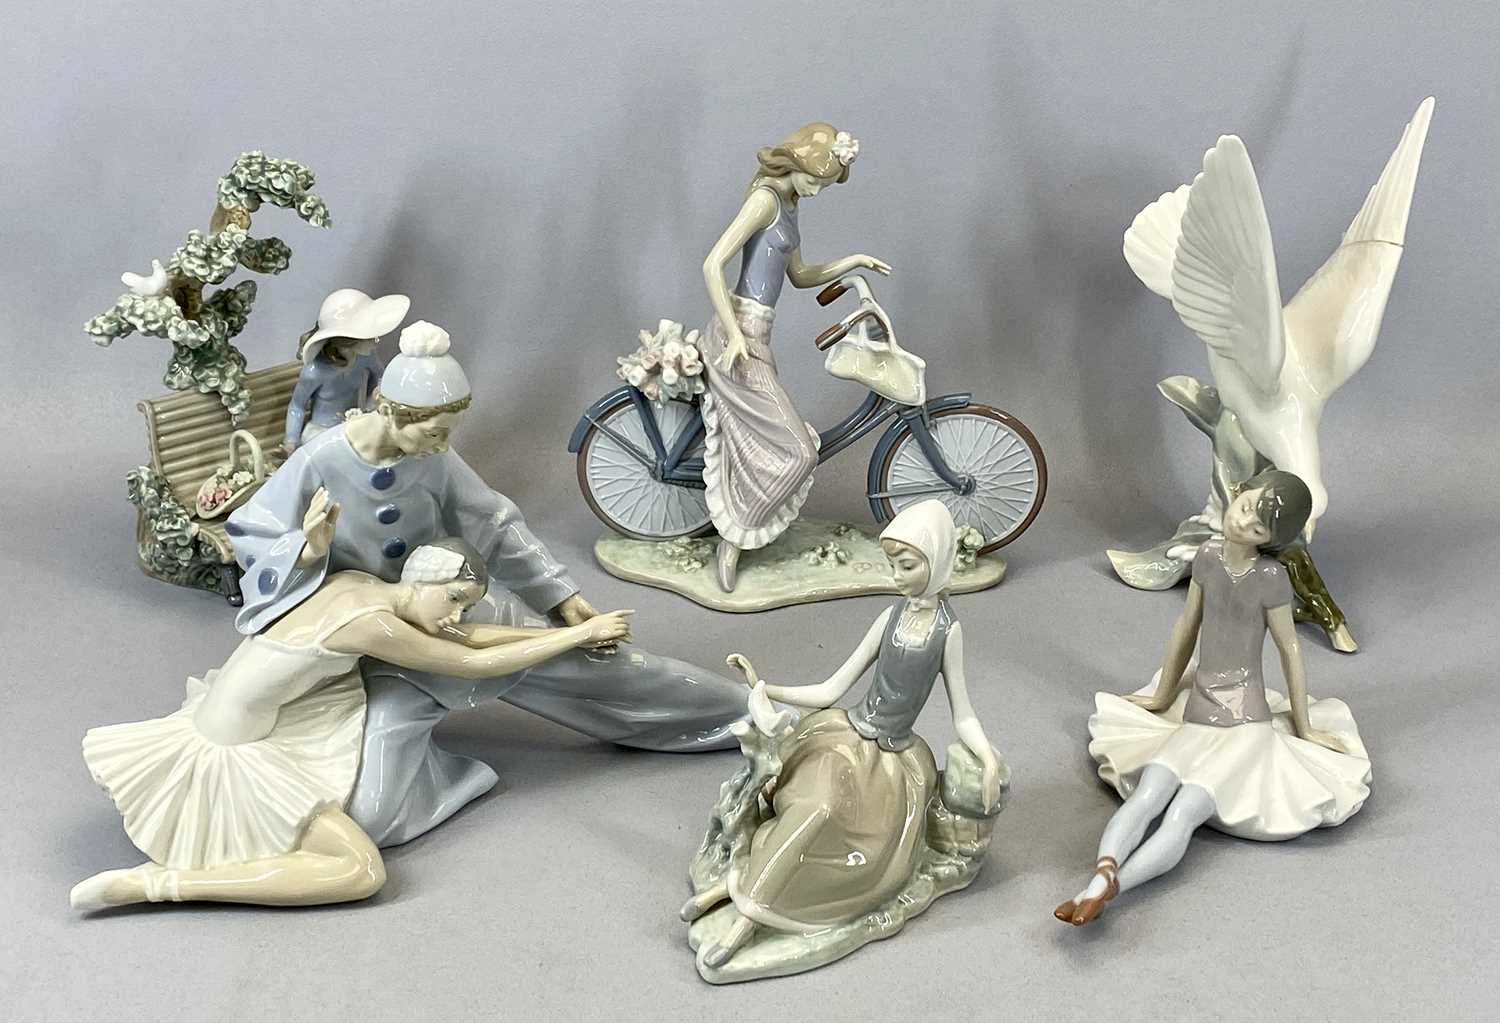 SIX LLADRO FIGURINES, girl on bicycle, 26cms H, ballet dancers, 24cms H, girl seated on bench, 23cms